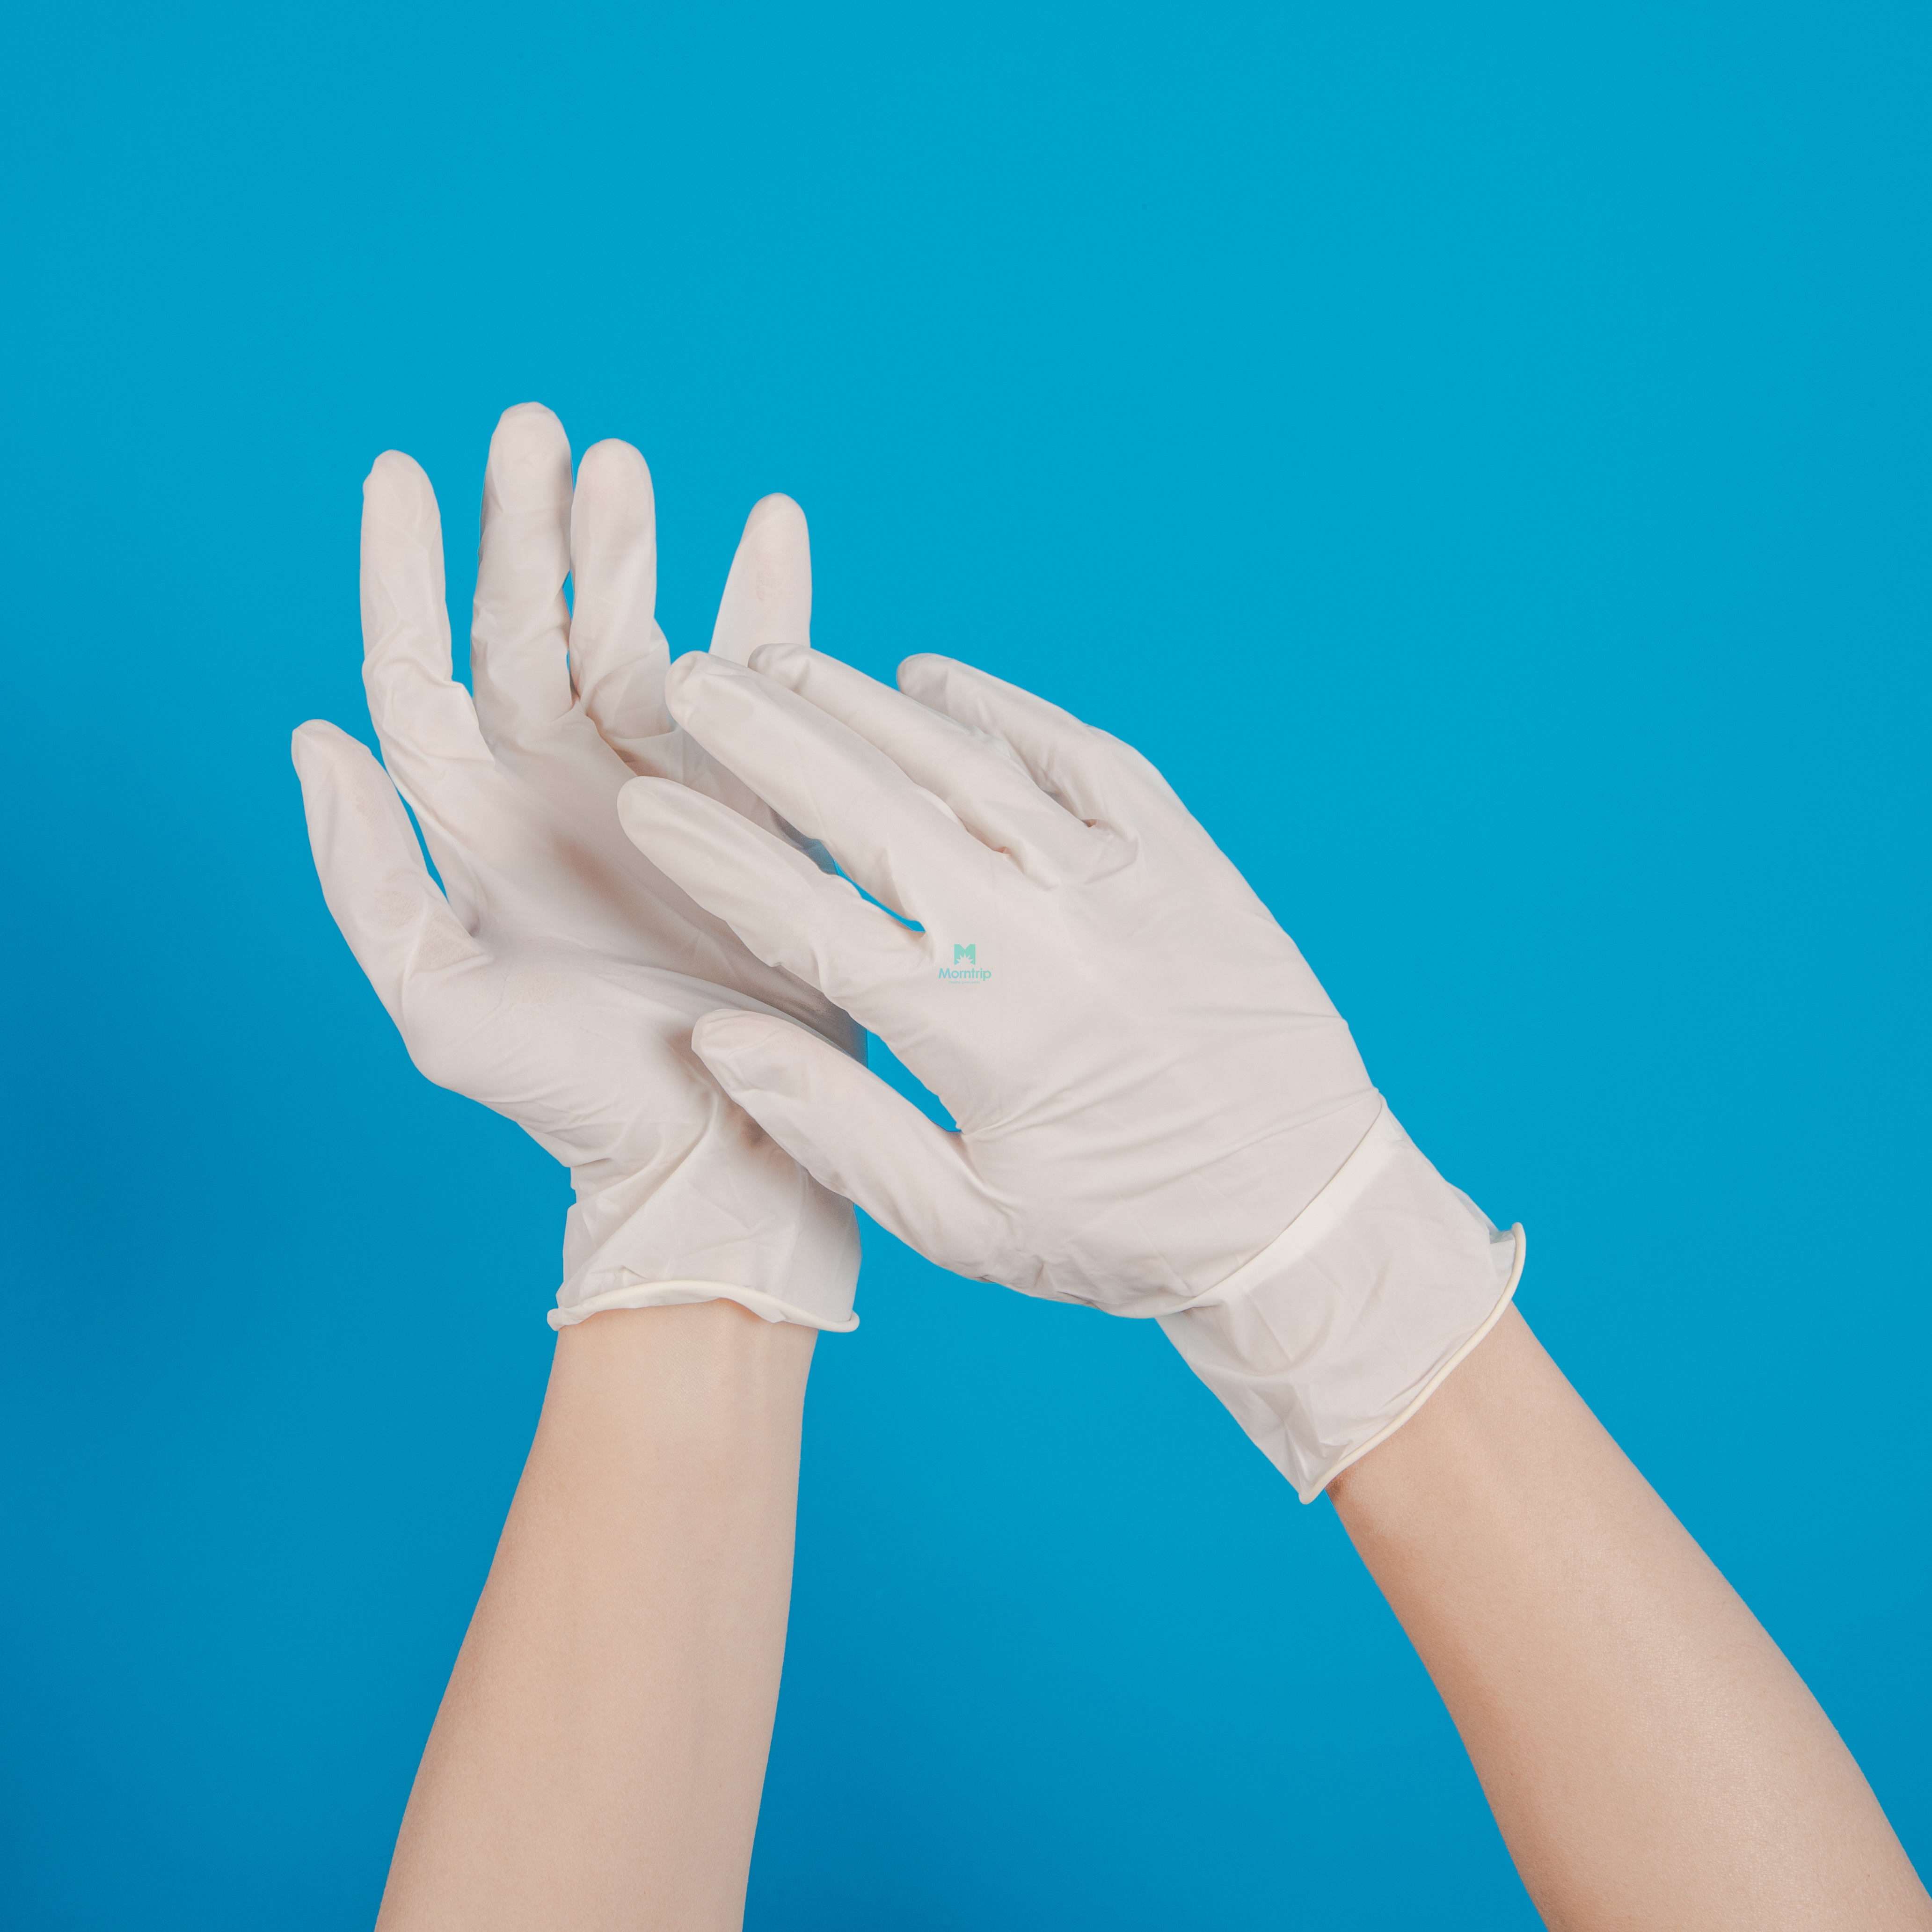 Ready To Ship Hand Gloves Blue 100 Pcs Powder Free Disposable Latex Gloves